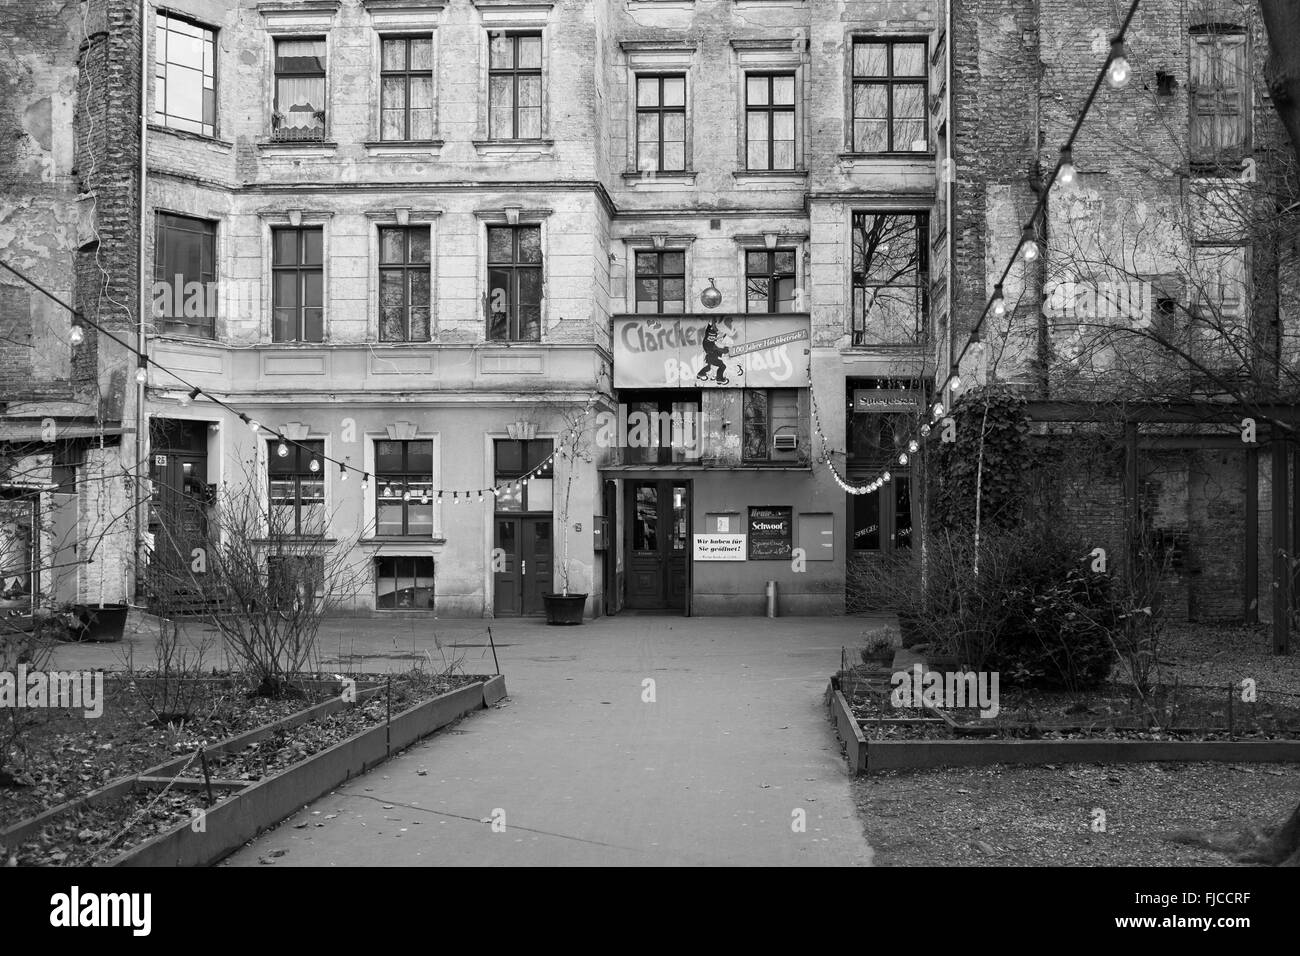 BERLIN, FEBRUARY 28: The Clarchens Ballhaus, Auguststrasse Berlin Mitte on February 28 2016. Formerly a ballroom, now a nightclu Stock Photo